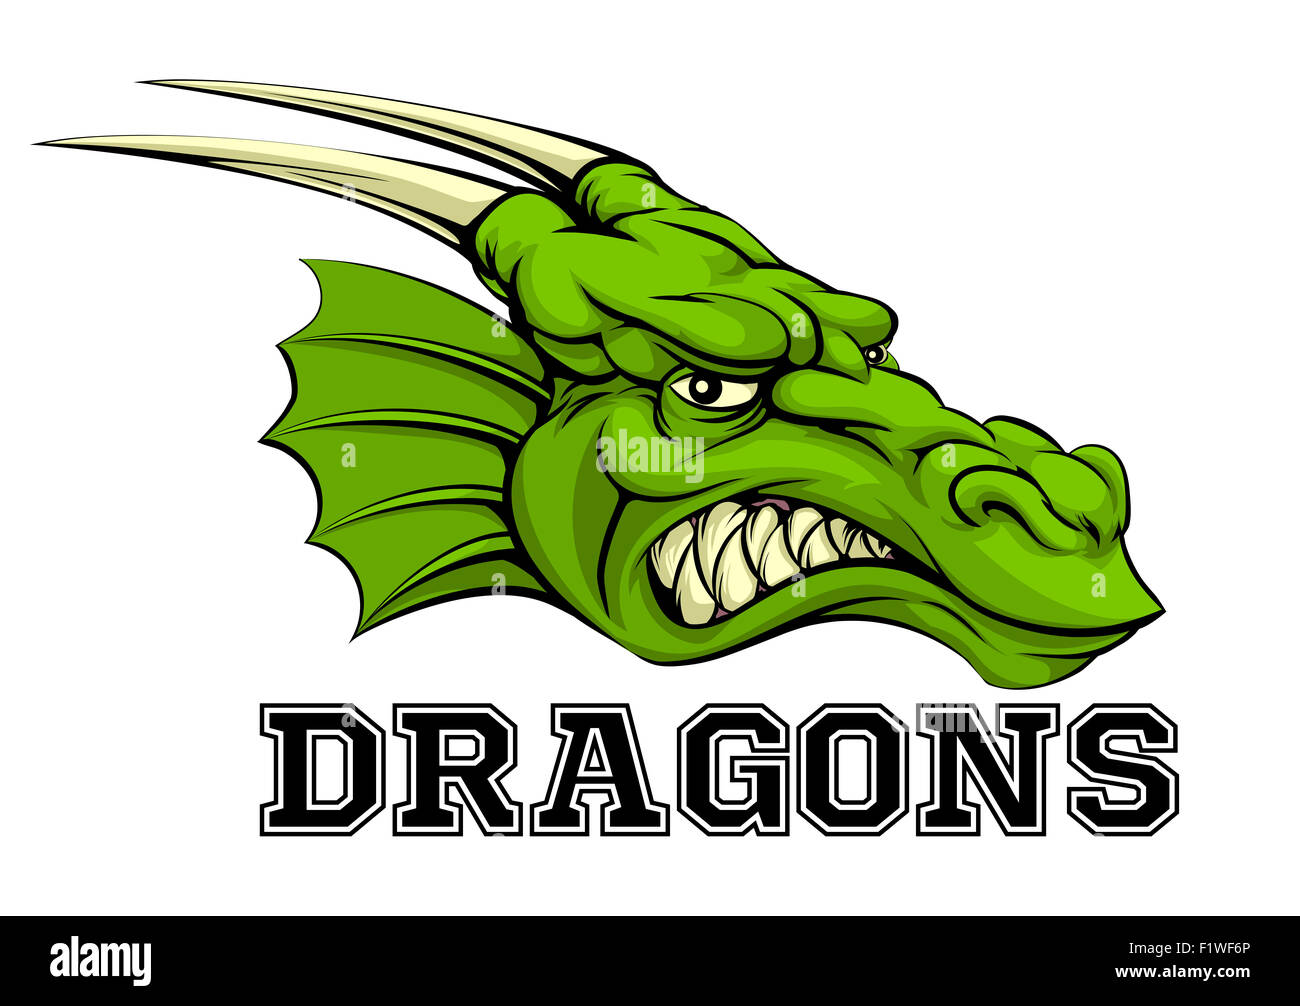 An illustration of a cartoon dragon sports team mascot with the text Dragons  Stock Photo - Alamy